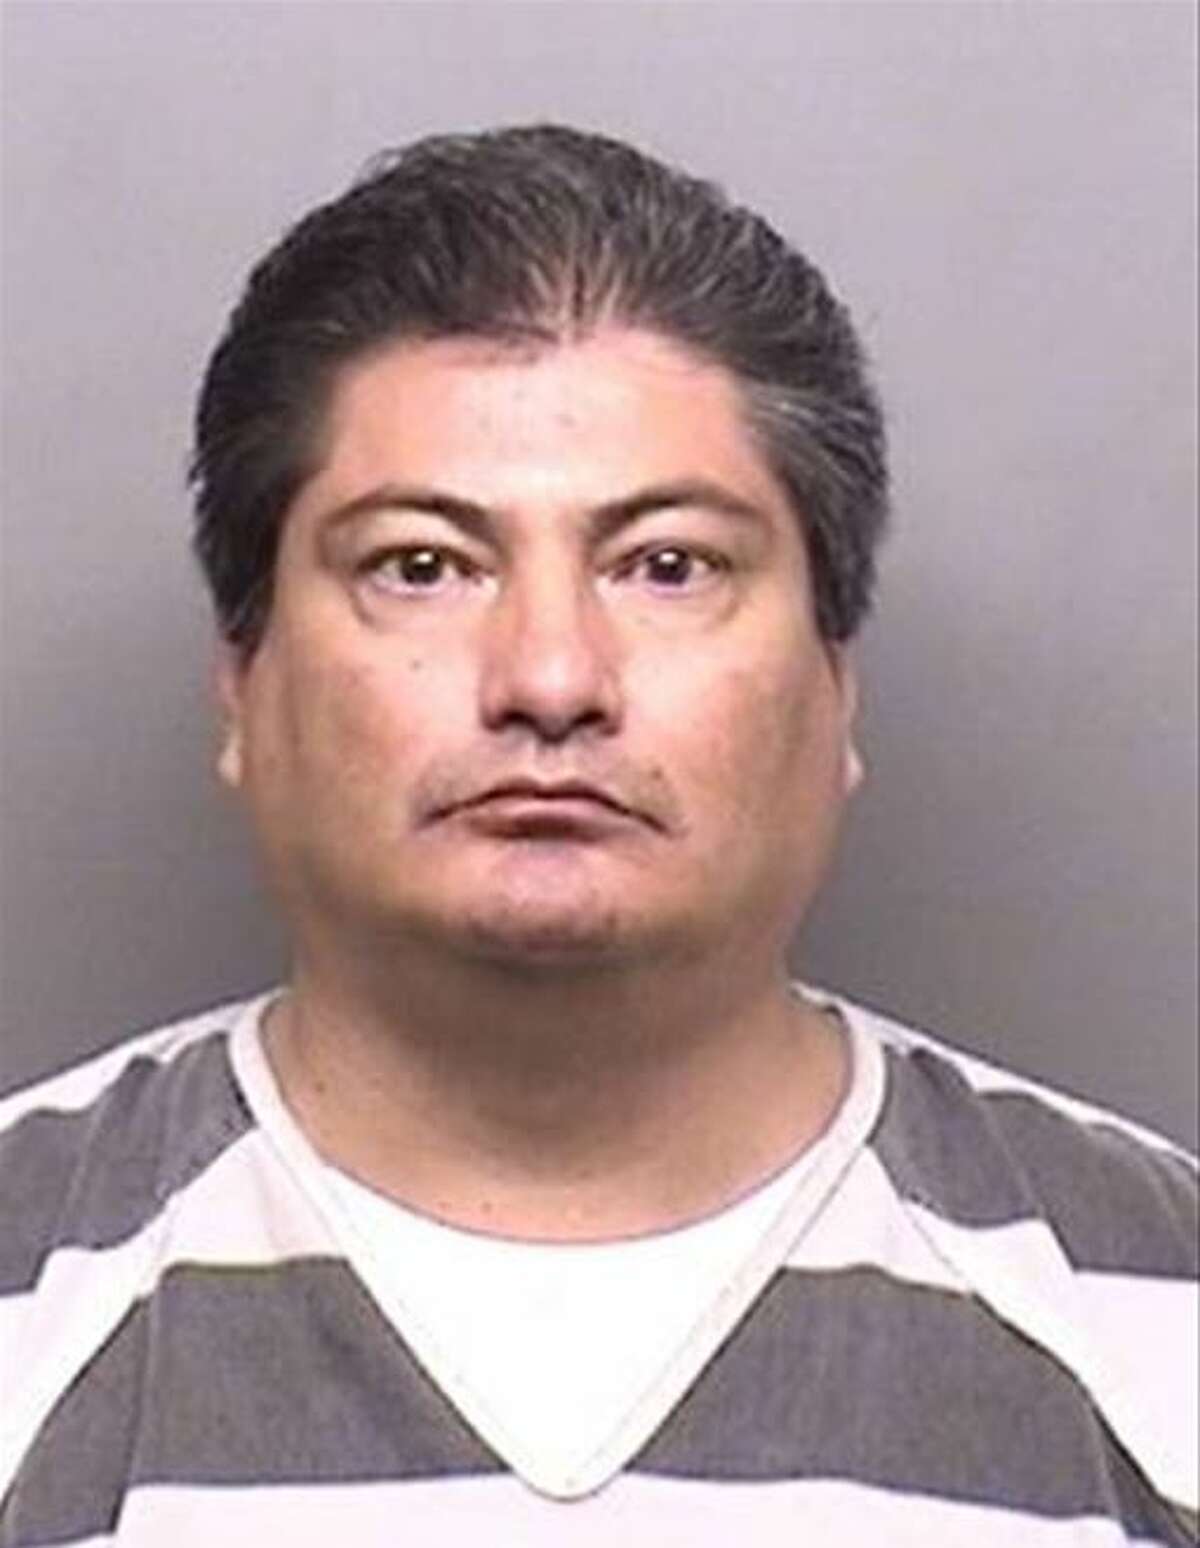 A grand jury indicted Sergio Delfino Garcia on a second-degree felony charge of theft of property between $100,000 and $200,000.